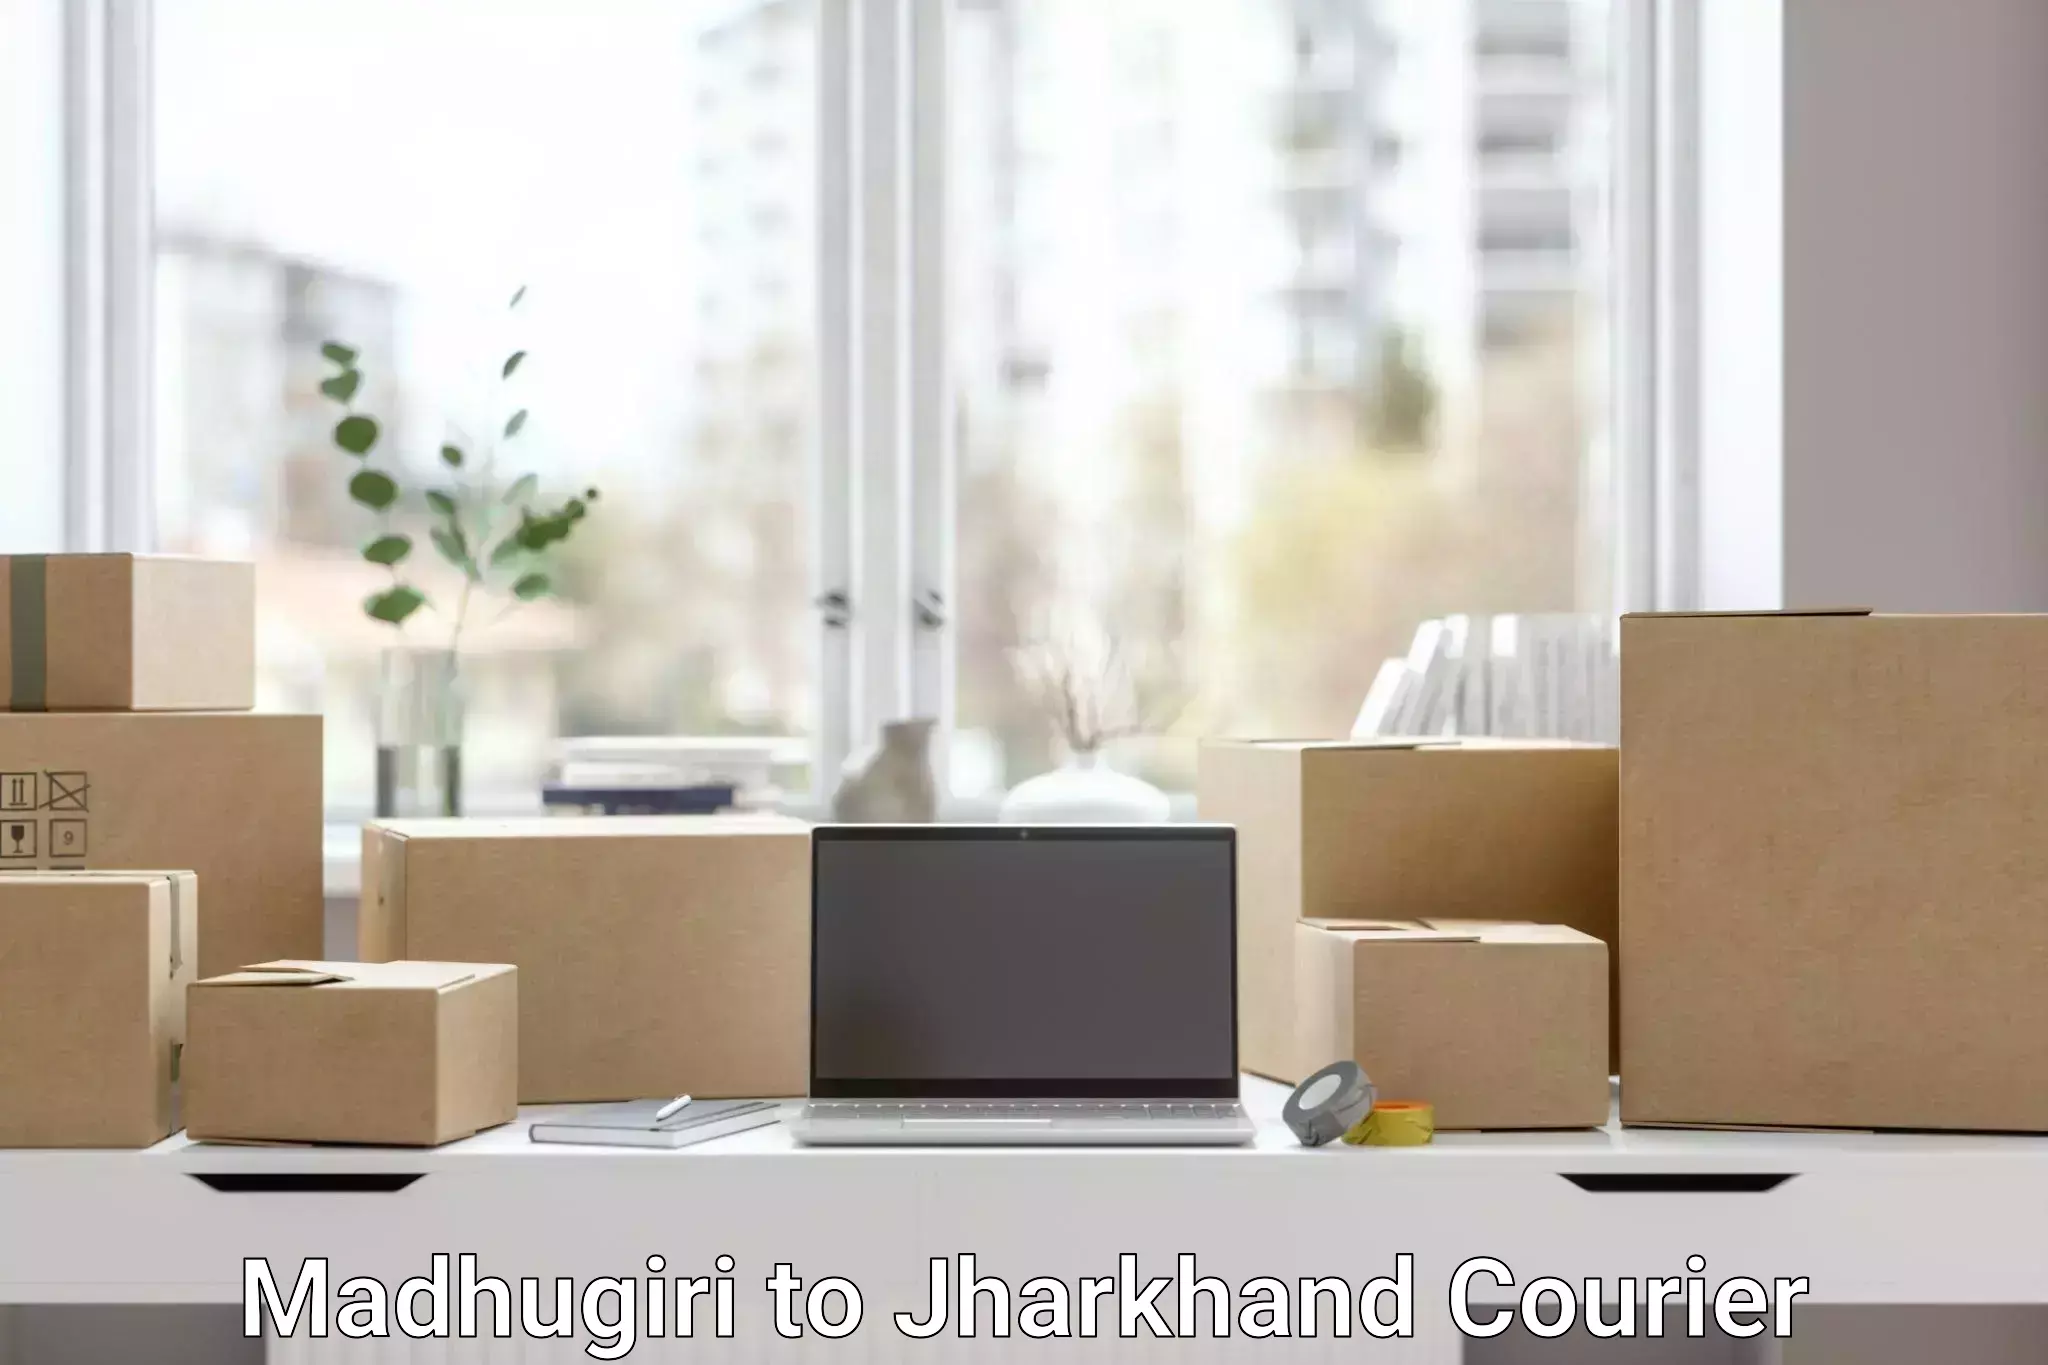 Tailored shipping plans Madhugiri to Jharkhand